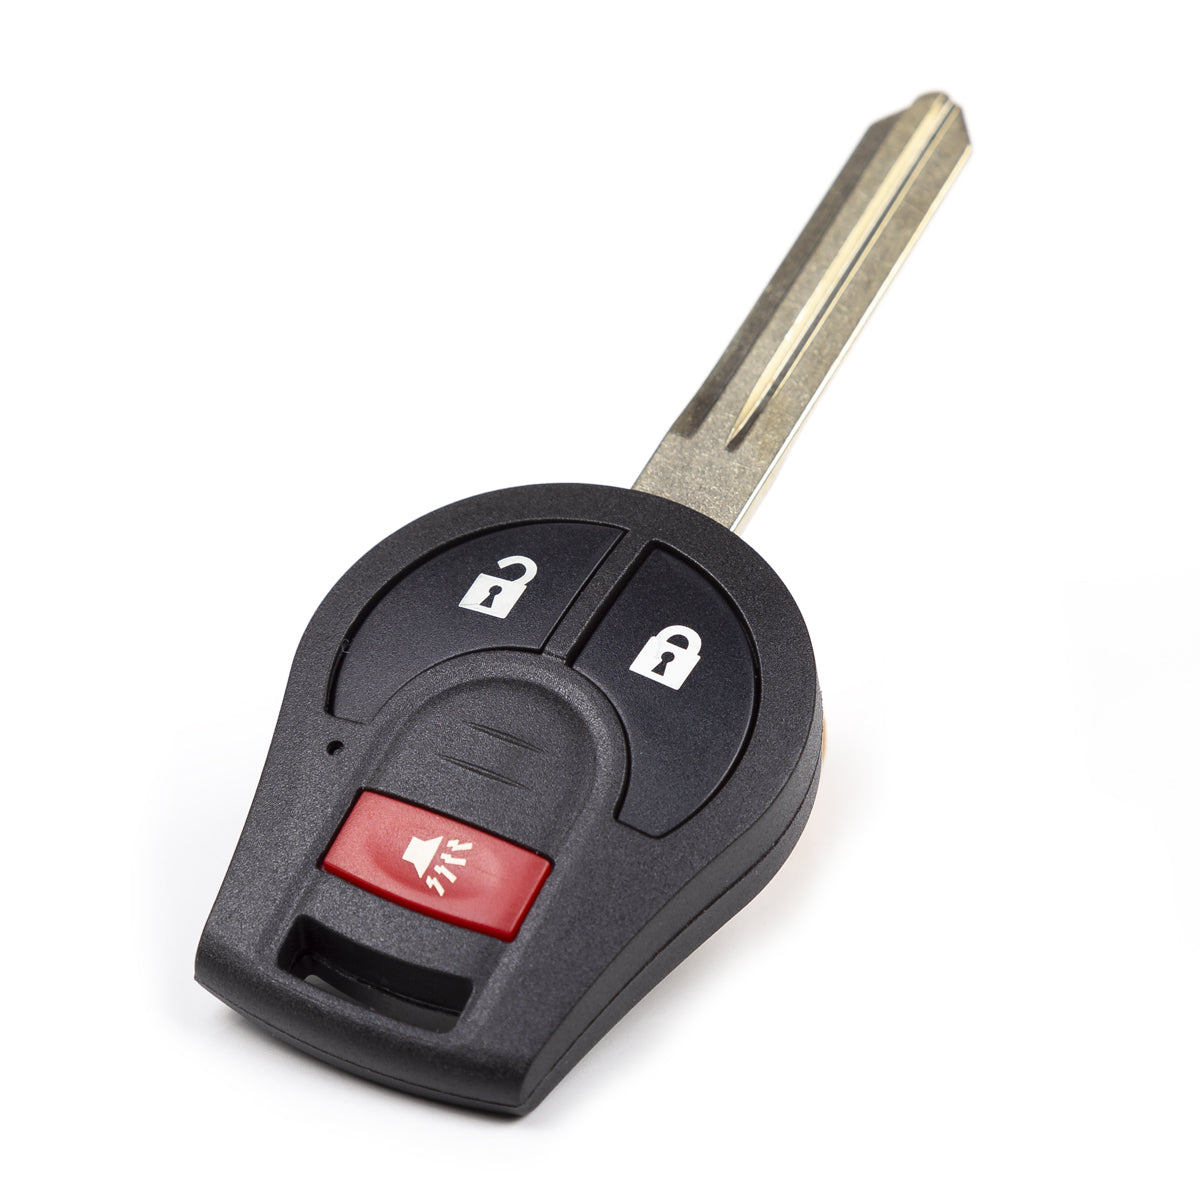 2011 Nissan Rogue Key Fob Replacement - Aftermarket - 3 Buttons Fob FCC# CWTWB1U751